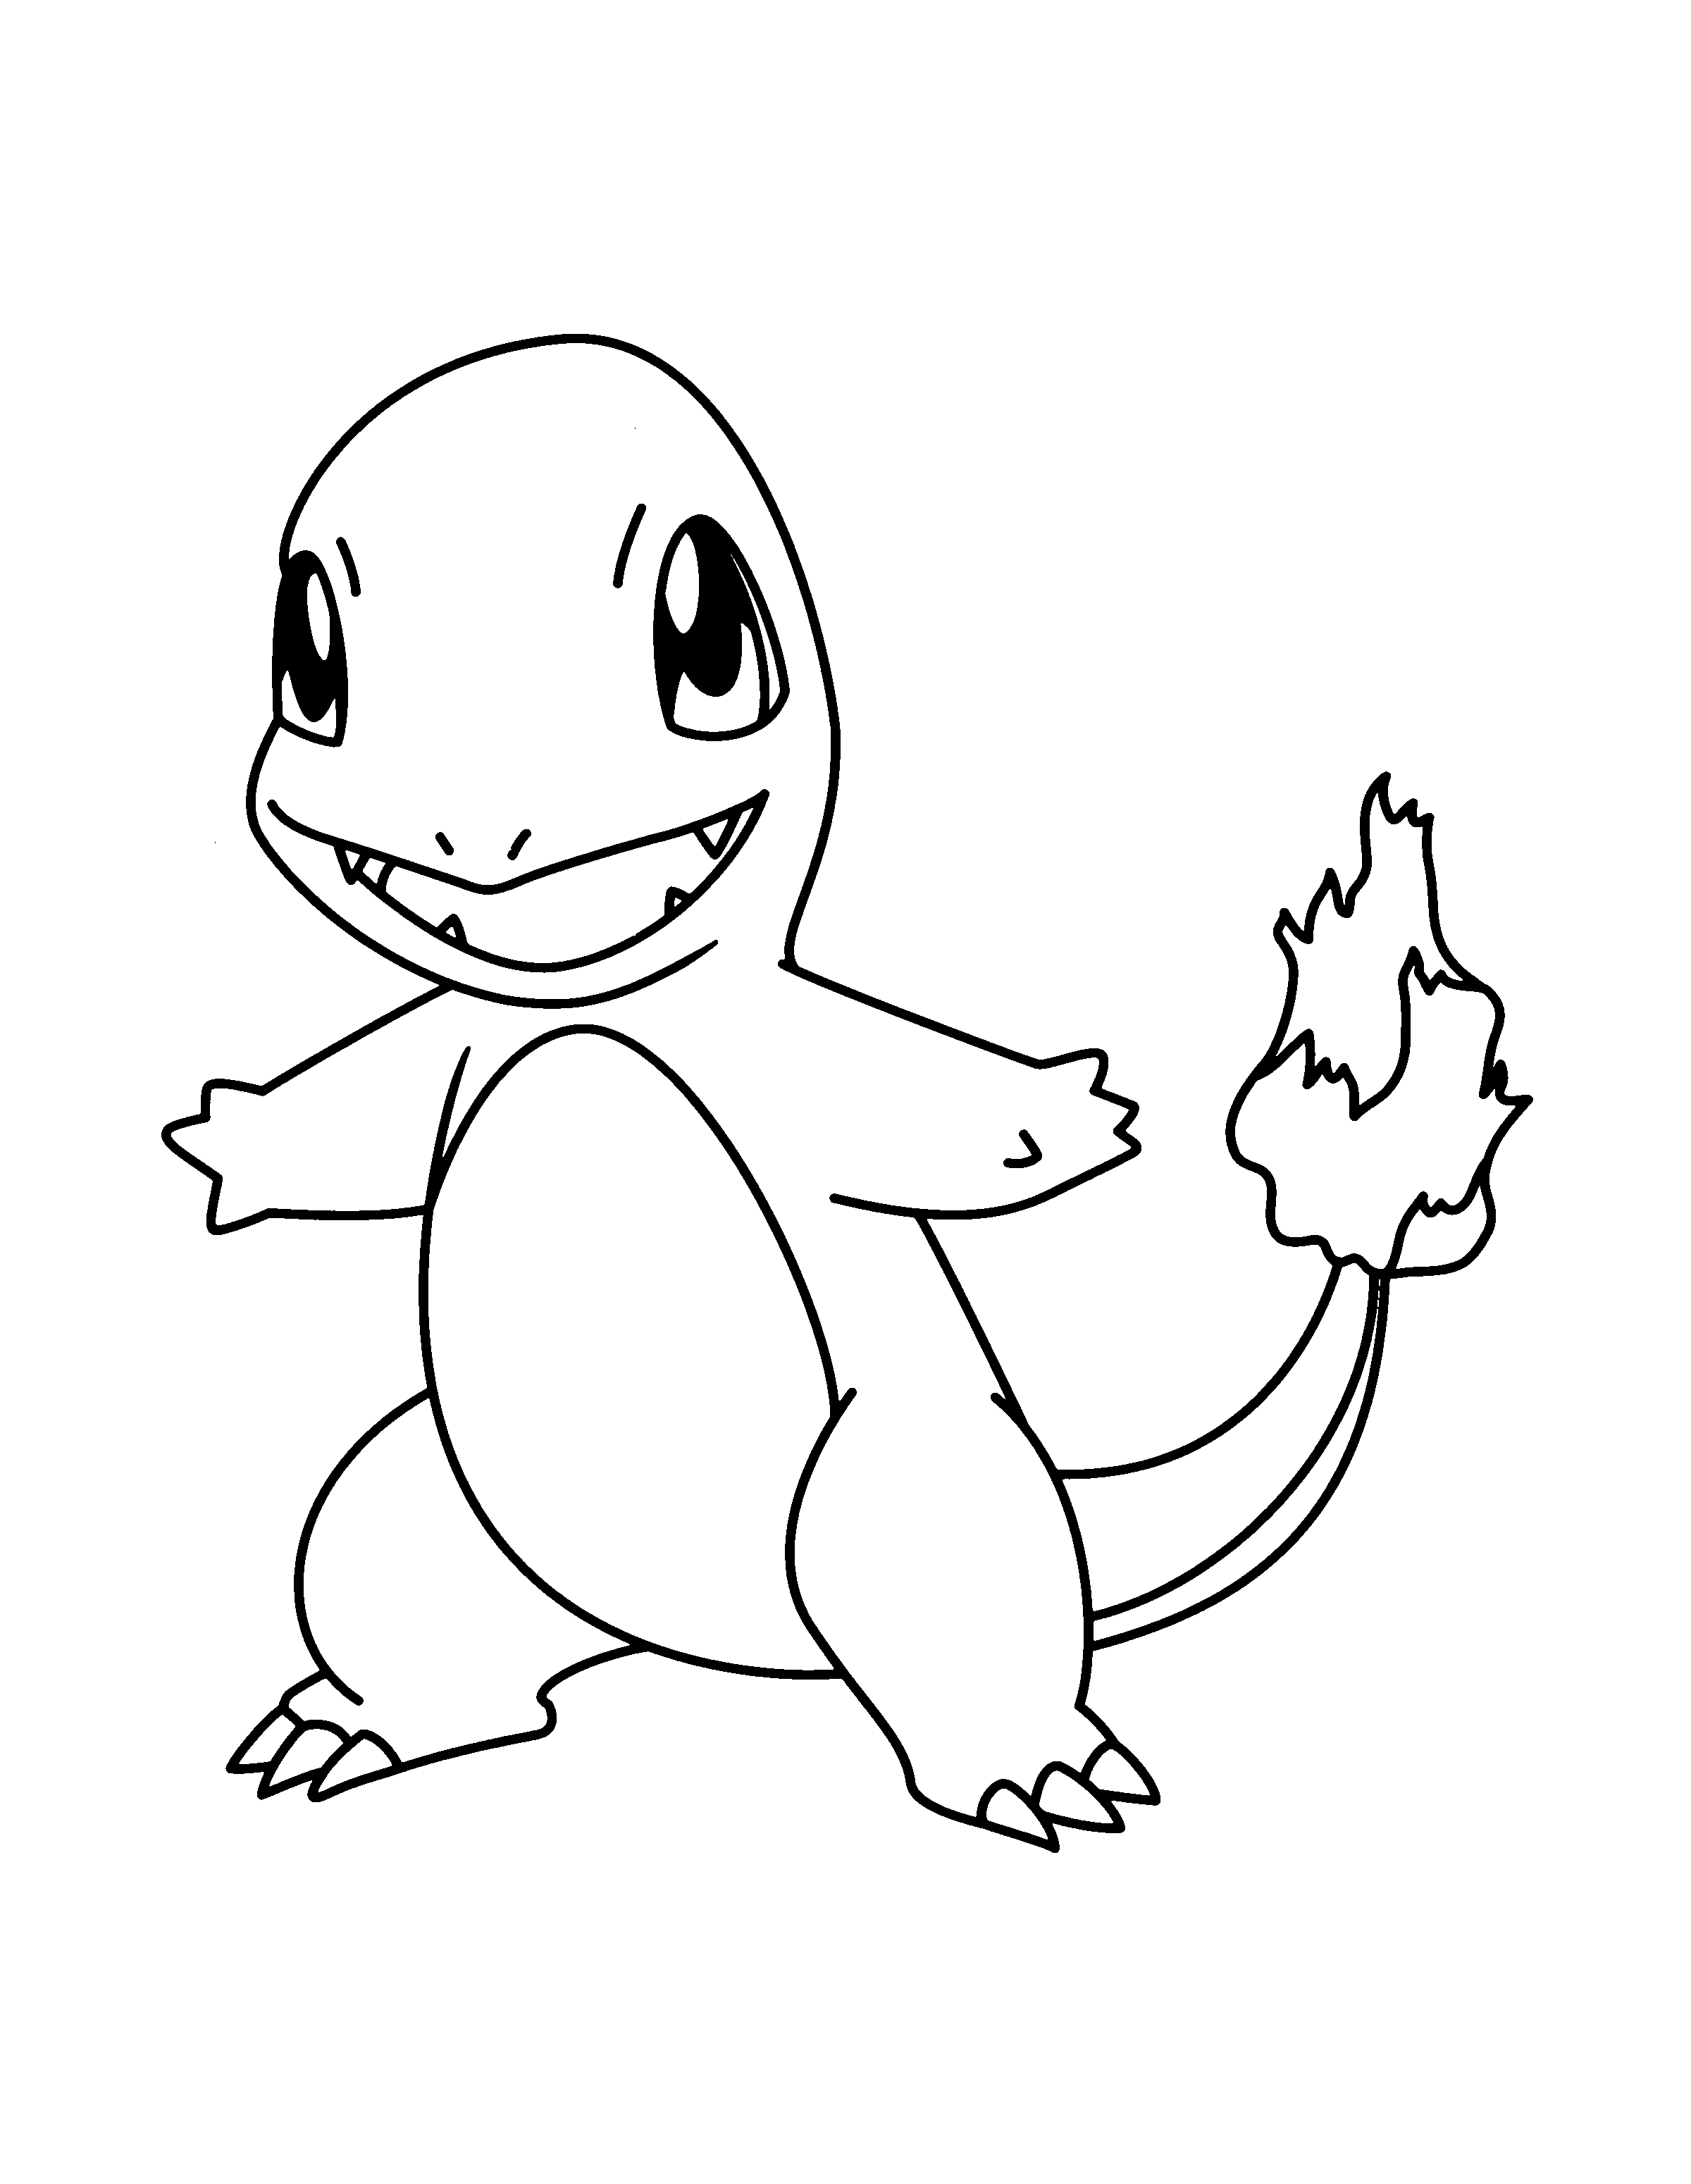 Pokemon Charmander Coloring Pages Coloring Home This collection of charmander images can be colored and used freely for educational activities with your kids. pokemon charmander coloring pages